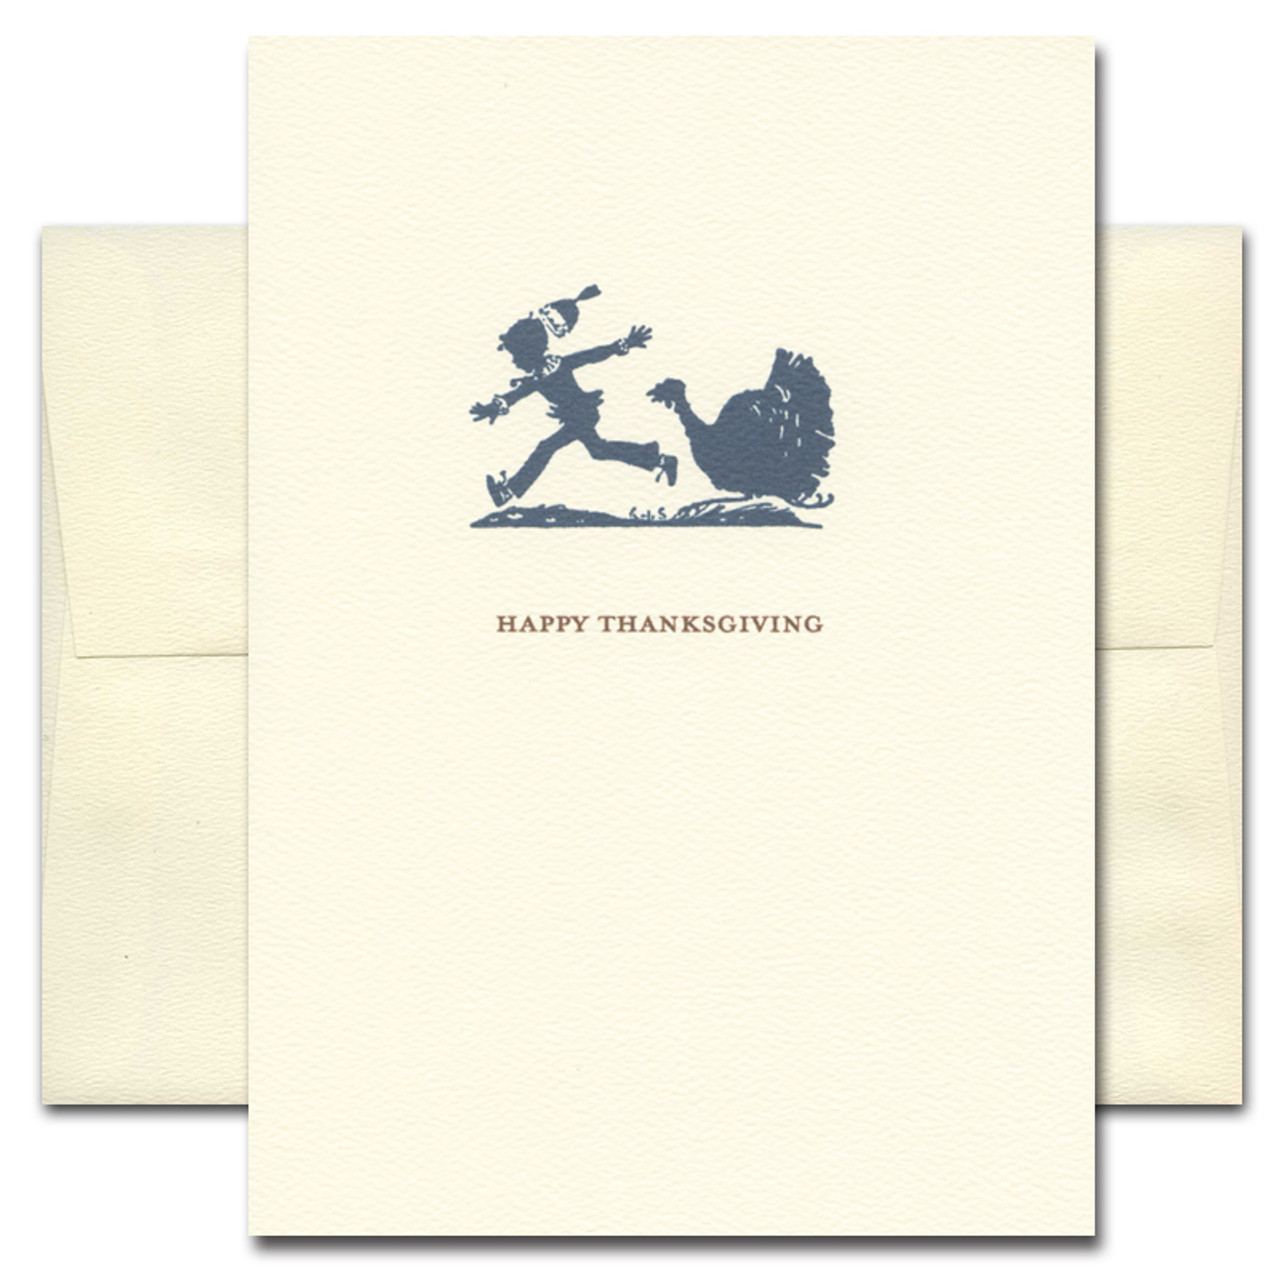 Thanksgiving Card - Turkey Time. Cover shows silhouette of turkey chasing a youngster and the words Happy Thanksgiving